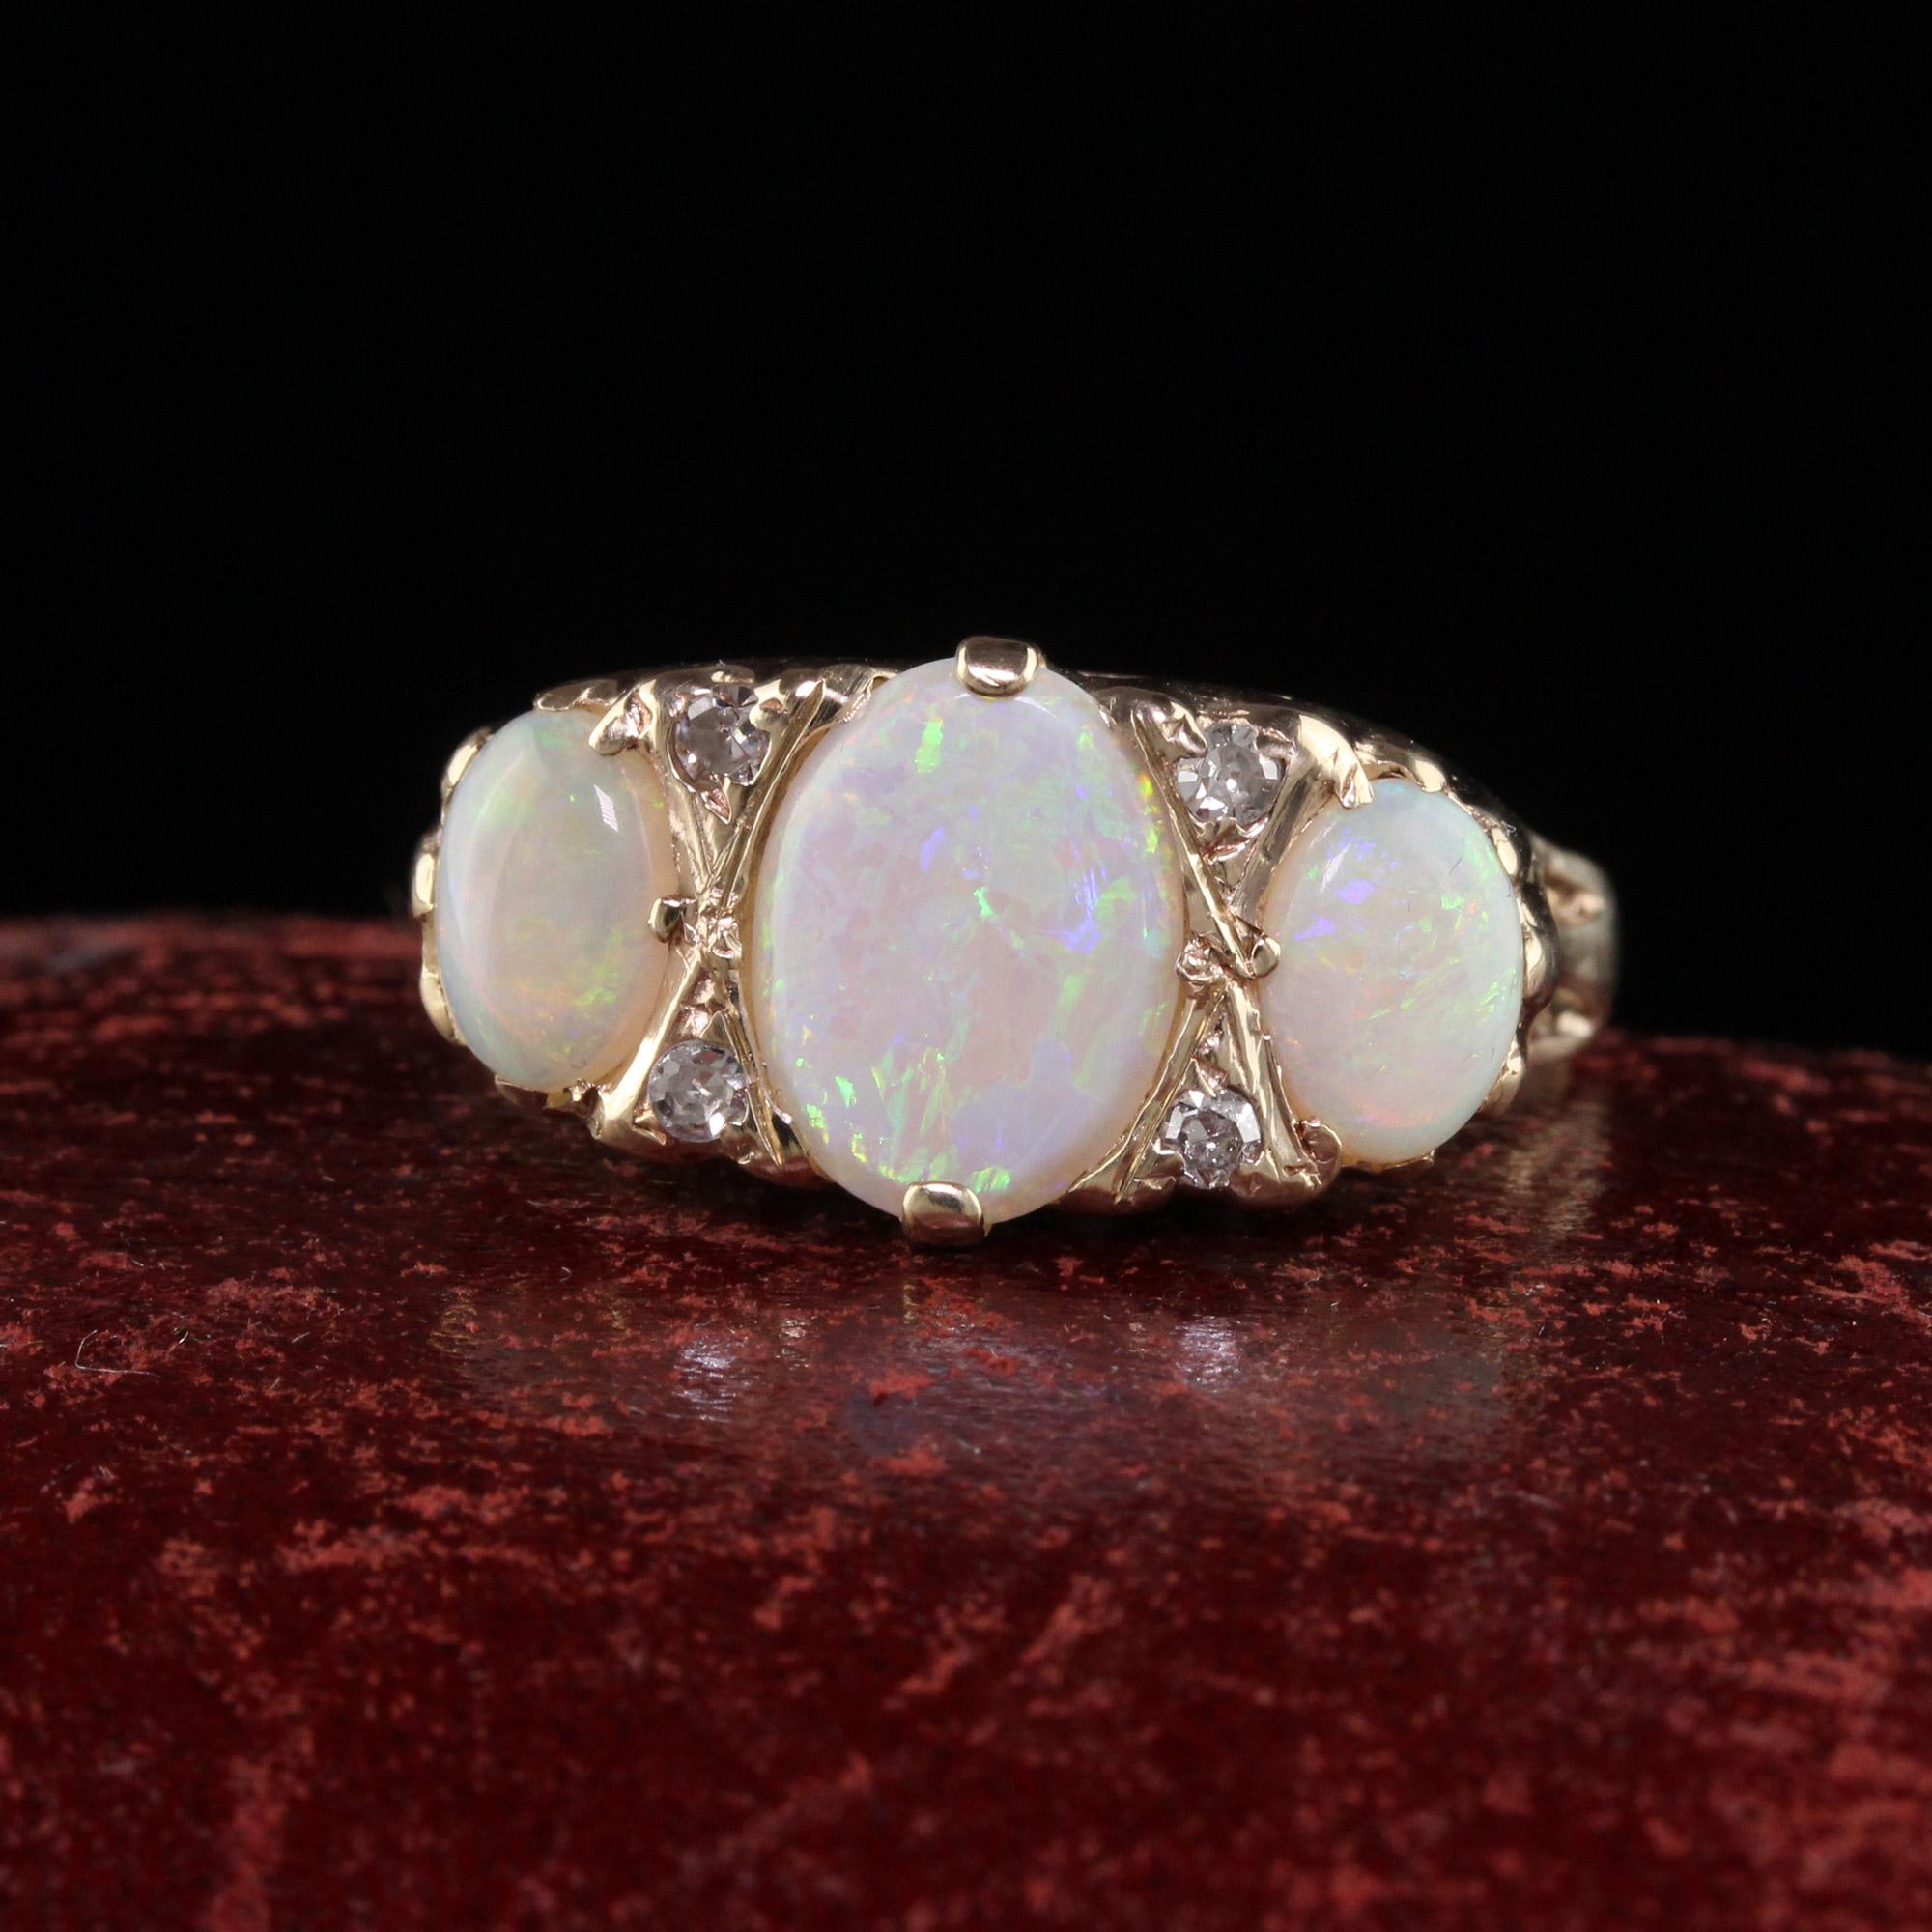 Beautiful Antique Victorian English 10K Yellow Gold Opal three Stone Ring. This gorgeous ring is crafted in 10k yellow gold. The ring holds three beautiful opals that have beautiful color play. There are small old cut diamonds in between the prongs